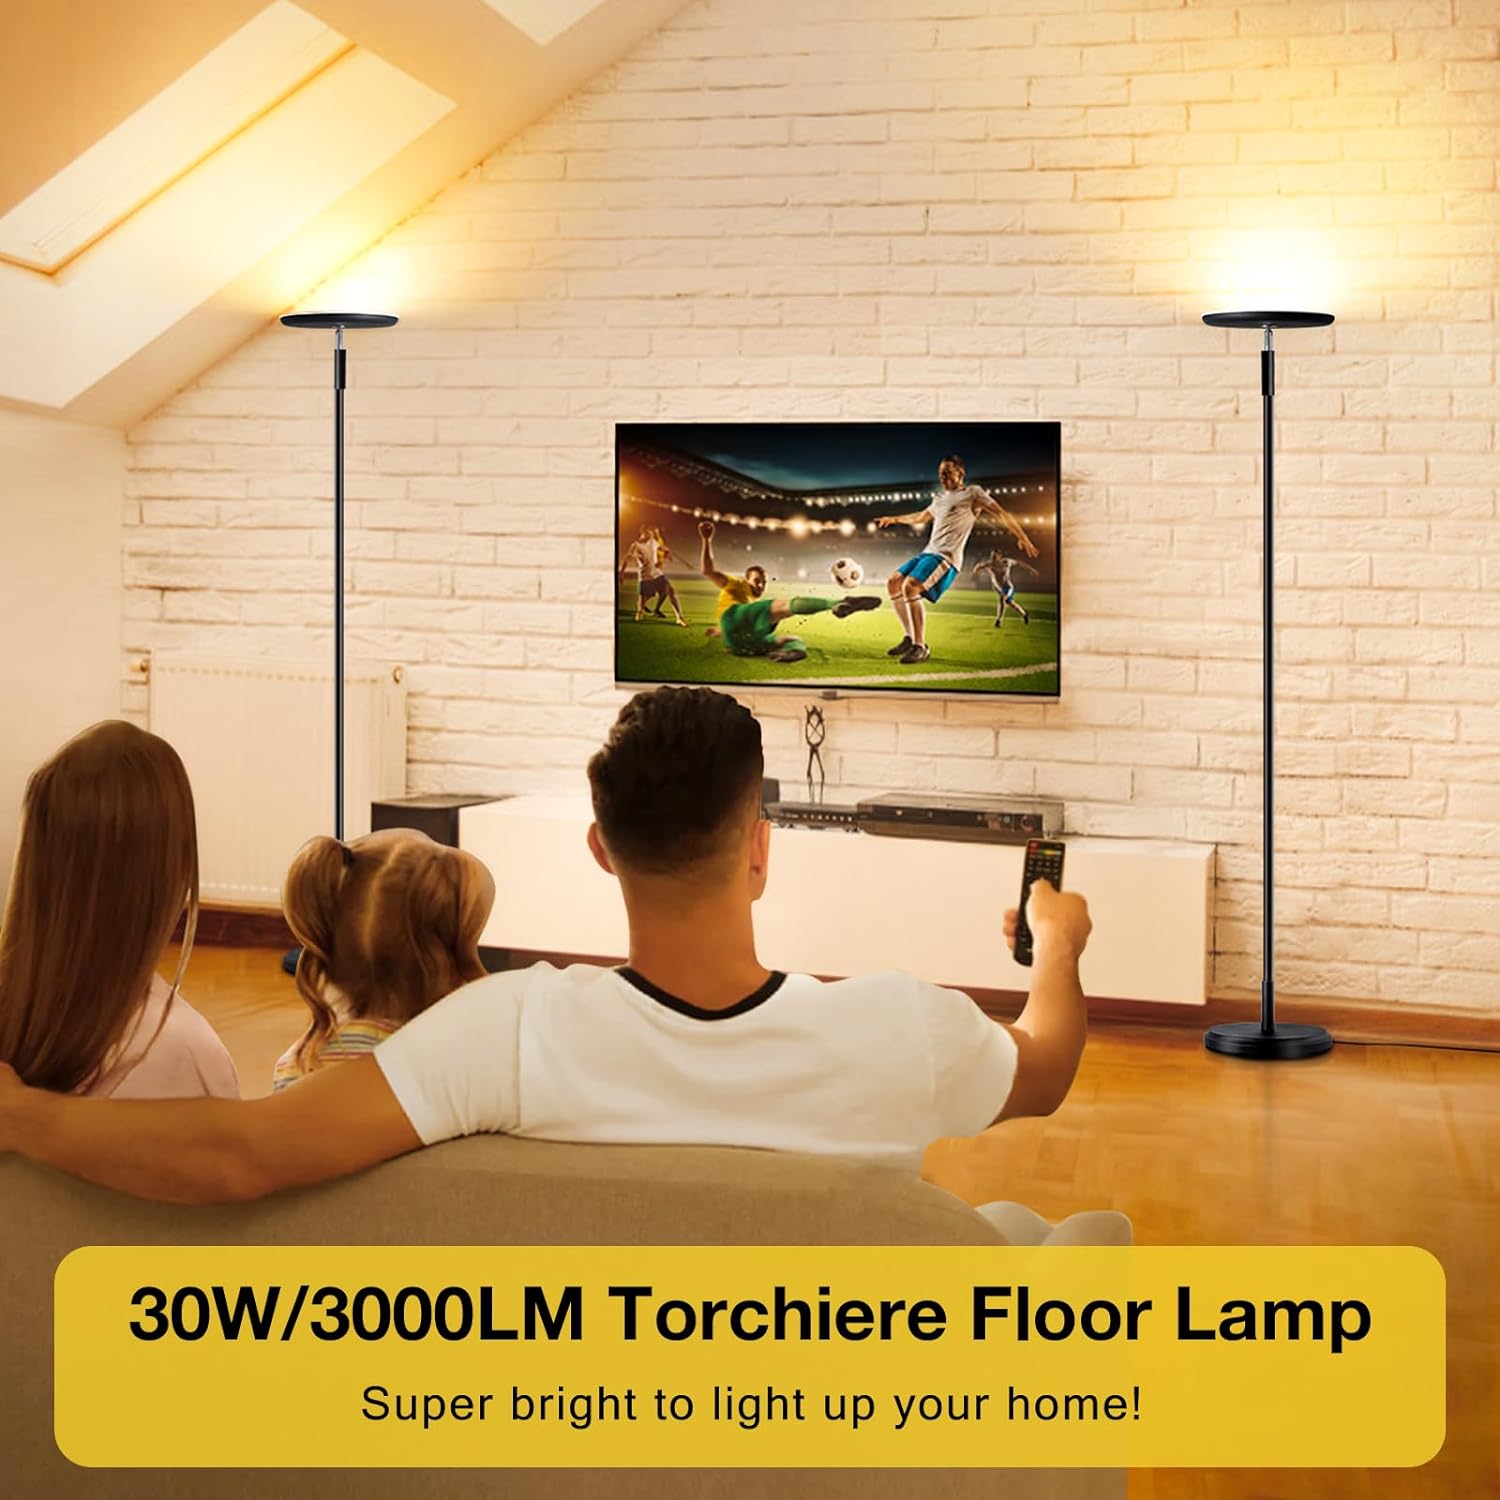 OUTON S1 Floor Lamp, 2-in-1 Smart RGBIC Corner Lamp & 30W/3000LM Bright LED Torchiere Floor Lamp, WiFi-App Control, 16 Million DIY Colors, Music Sync, Standing lamp for Living Room Bedroom Gaming Room